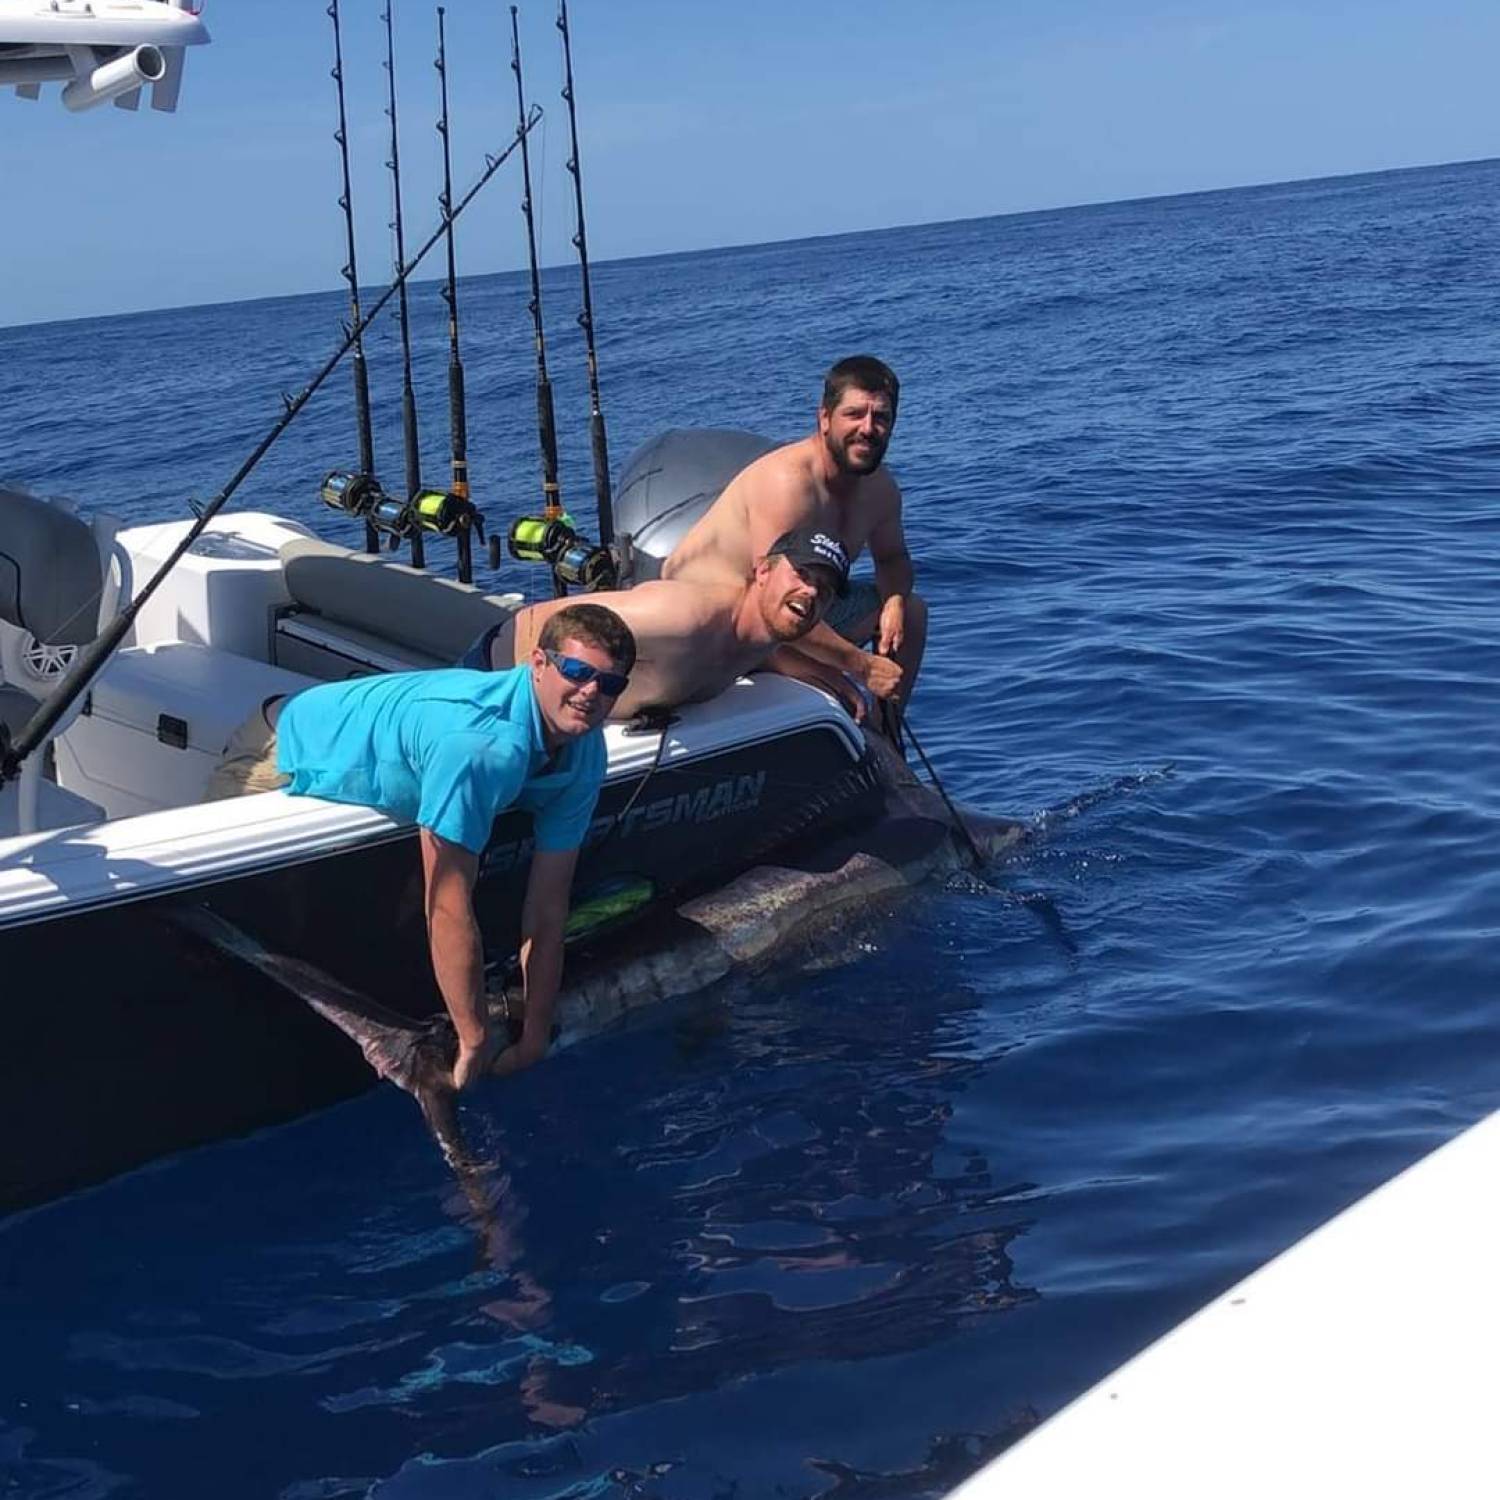 Title: 130" blue marlin off the coast of Murresl inlet SC 85 miles out - On board their Sportsman Open 232 Center Console - Location: Bubble rock. Participating in the Photo Contest #SportsmanMarch2024